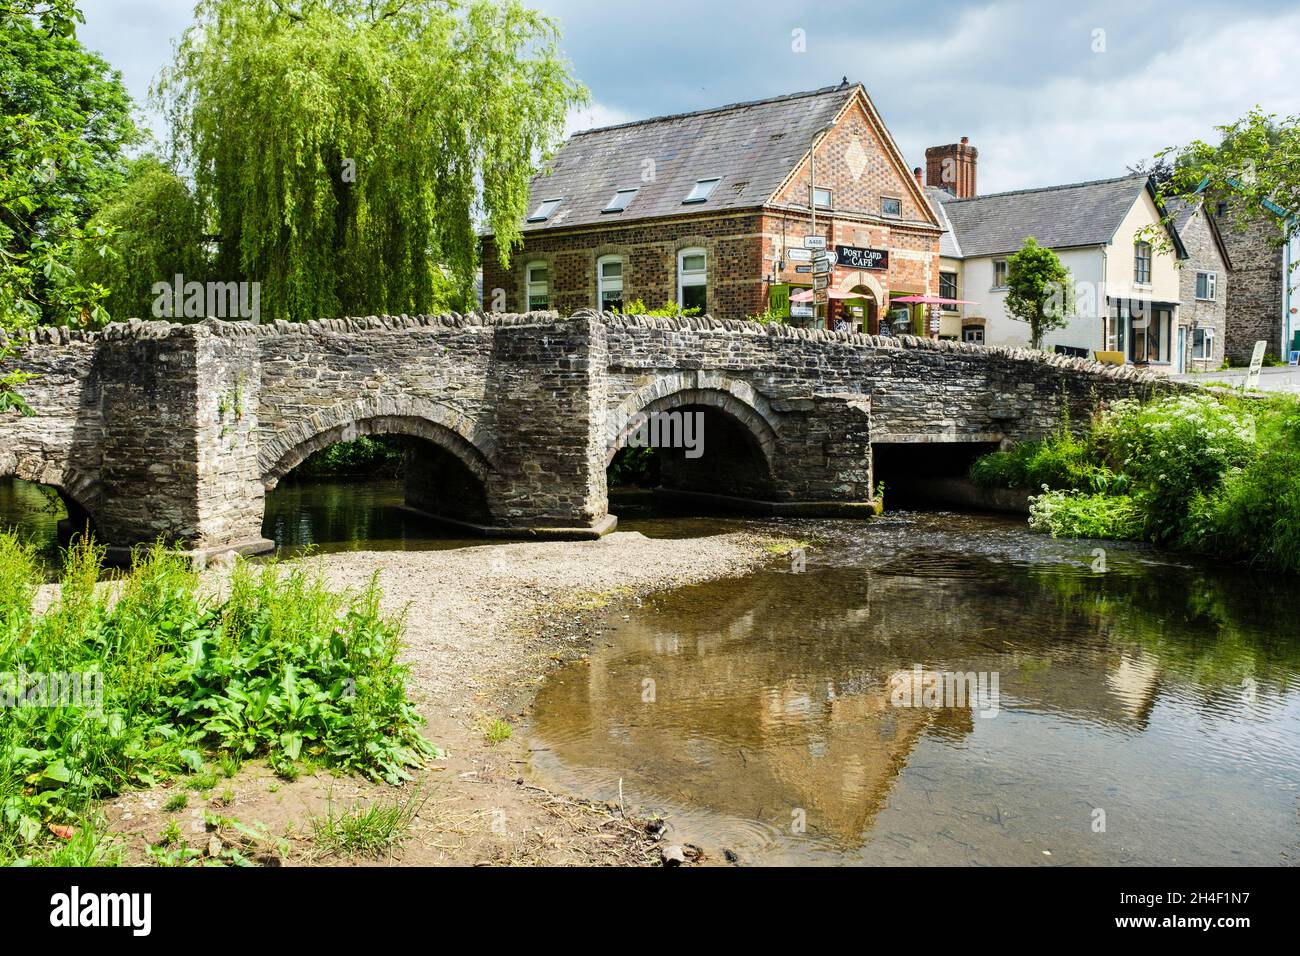 Packhorse bridge over River Clun in small village with Post Card cafe in Shropshire Hills Area of Outstanding Natural Beauty. Clun Shropshire England Stock Photo